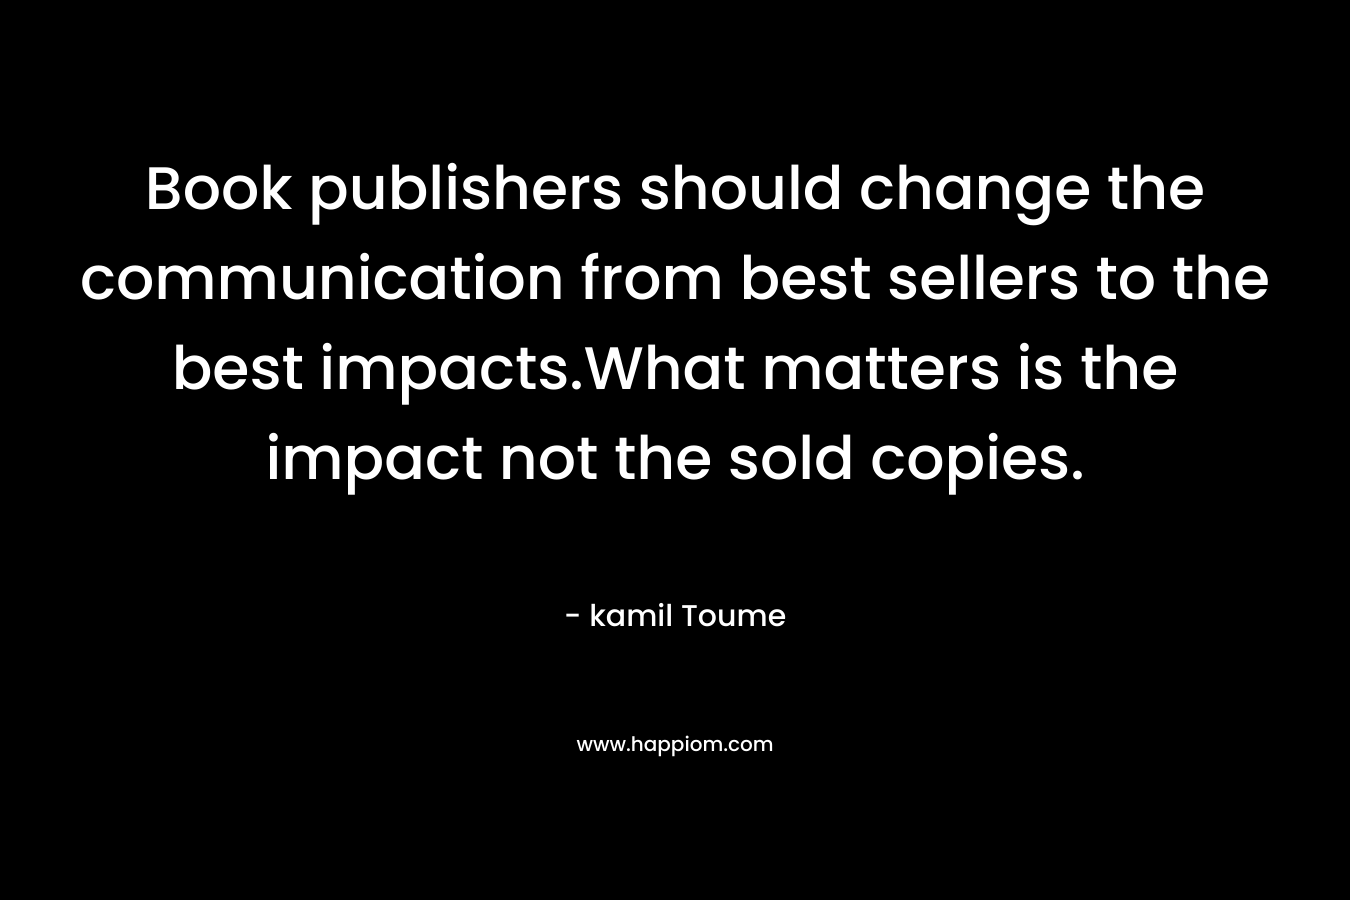 Book publishers should change the communication from best sellers to the best impacts.What matters is the impact not the sold copies.